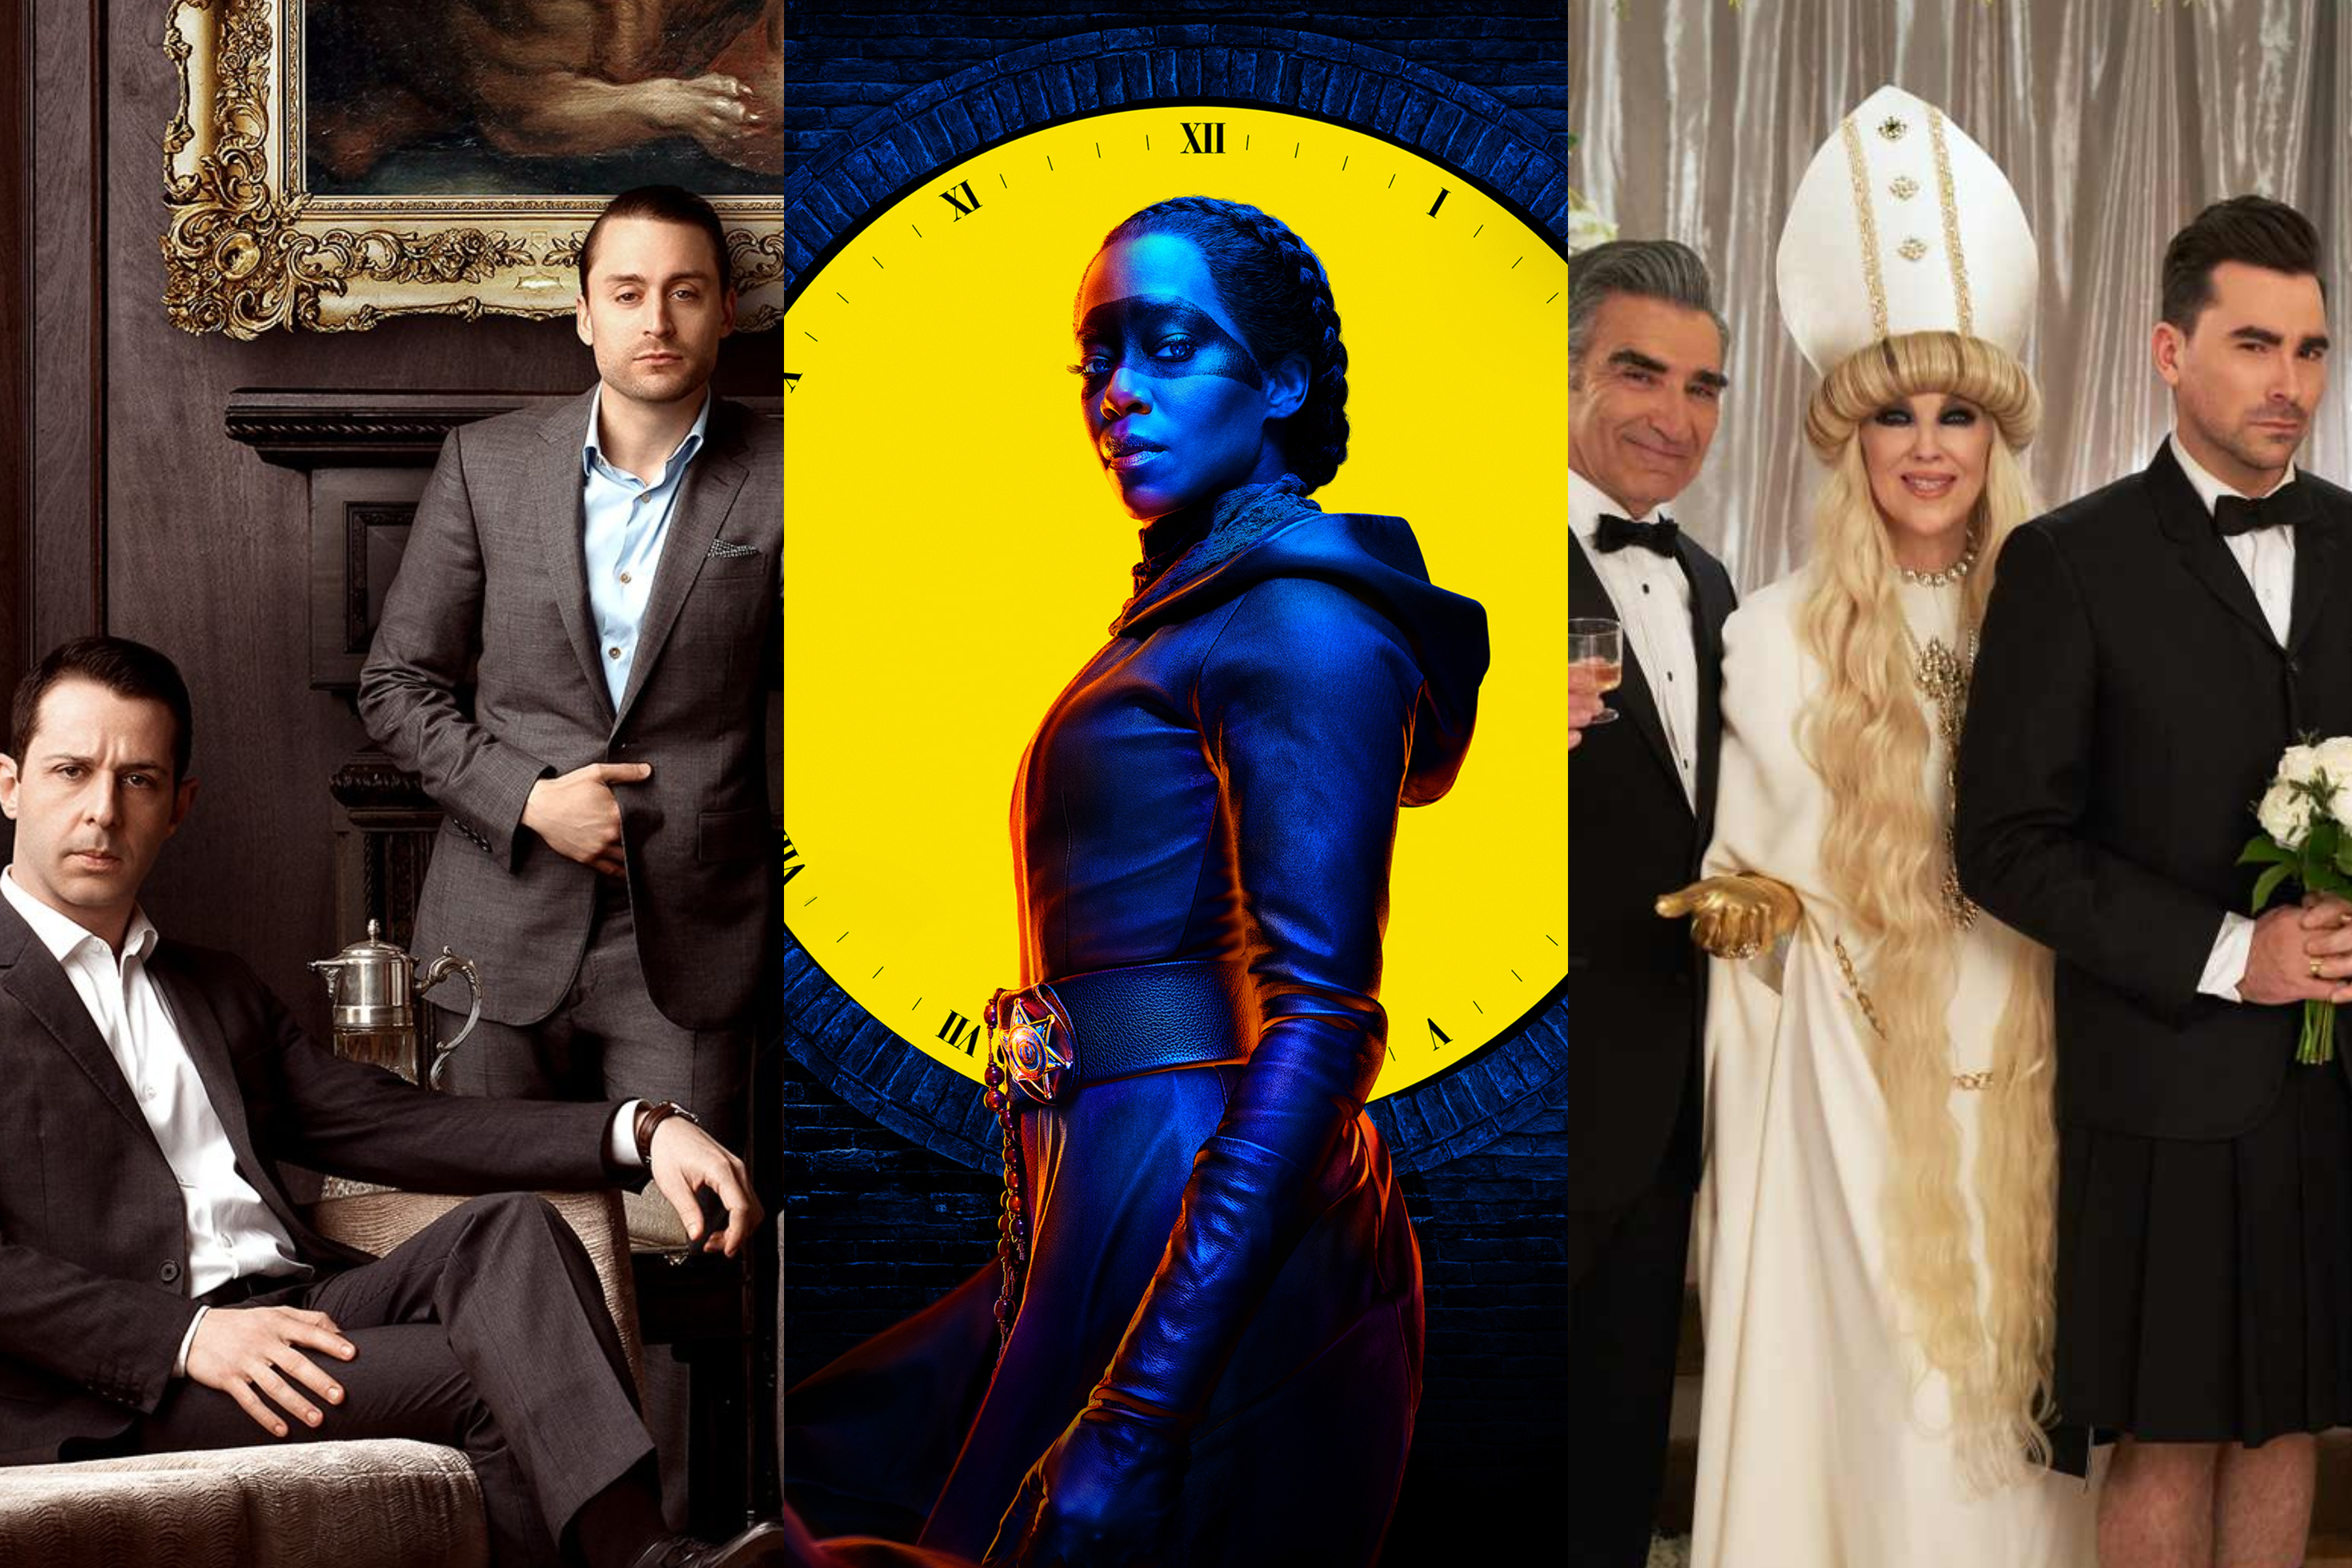 Images from HBO’s Succession, HBO’s Watchmen, and Pop’s Schitt’s Creek, from left to right.